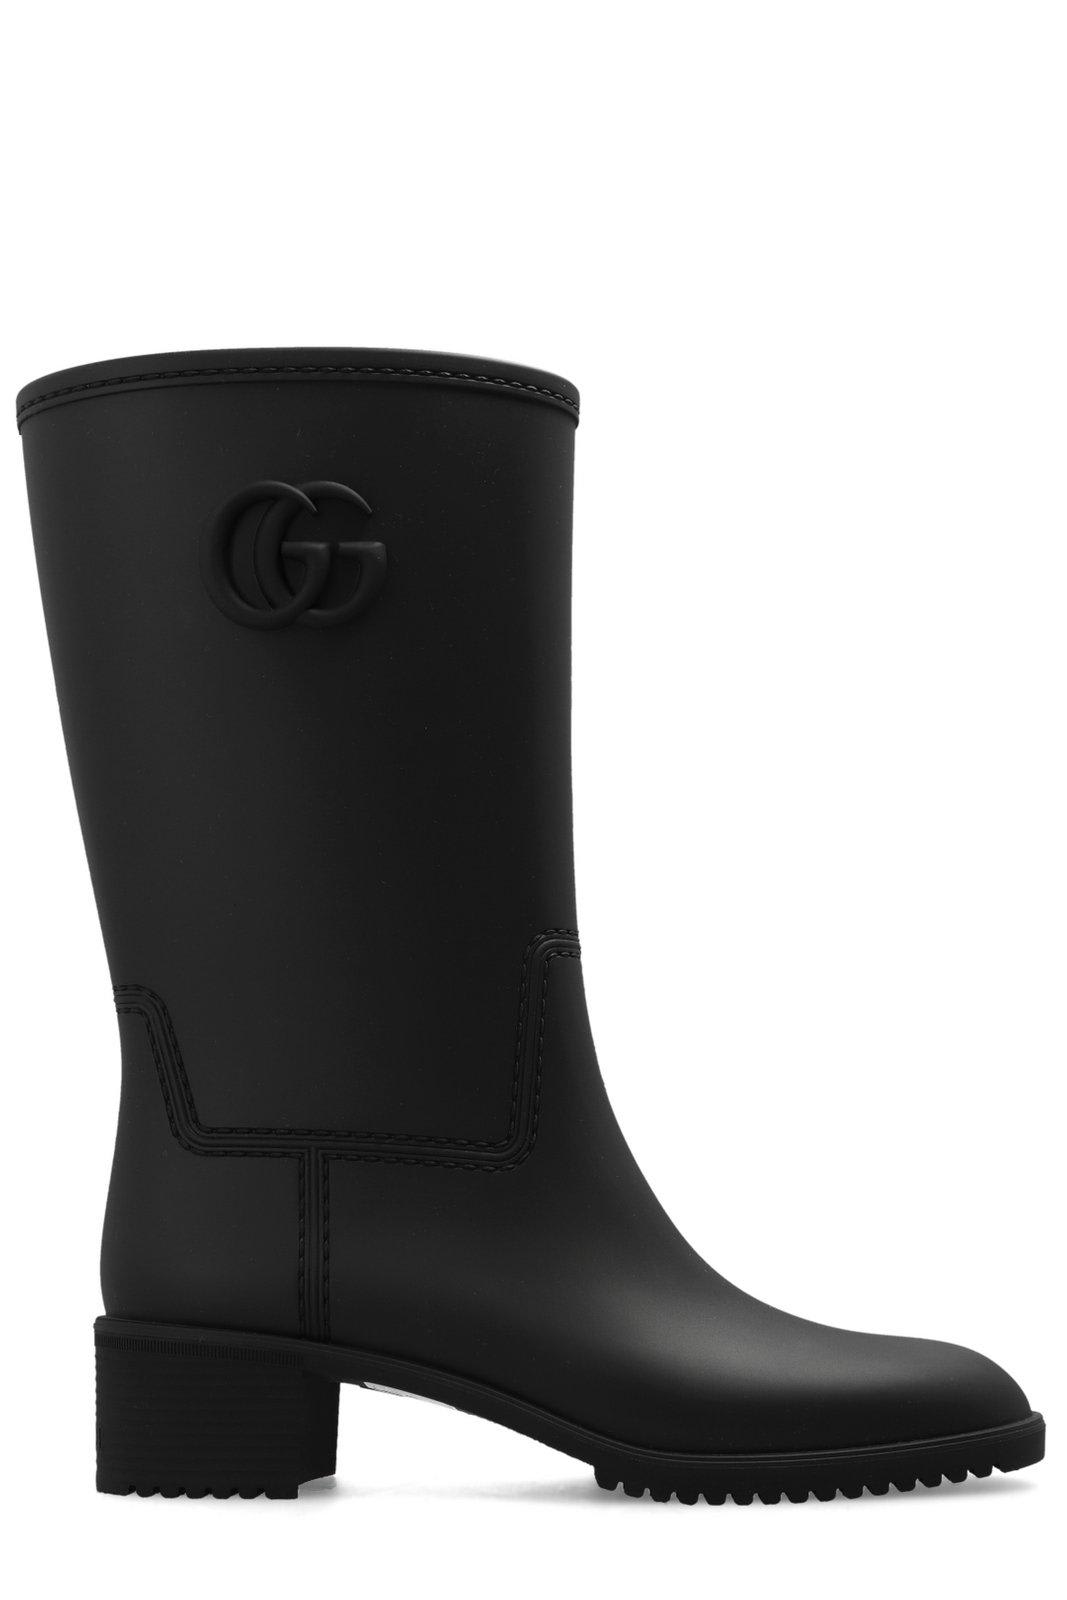 Double G Boots